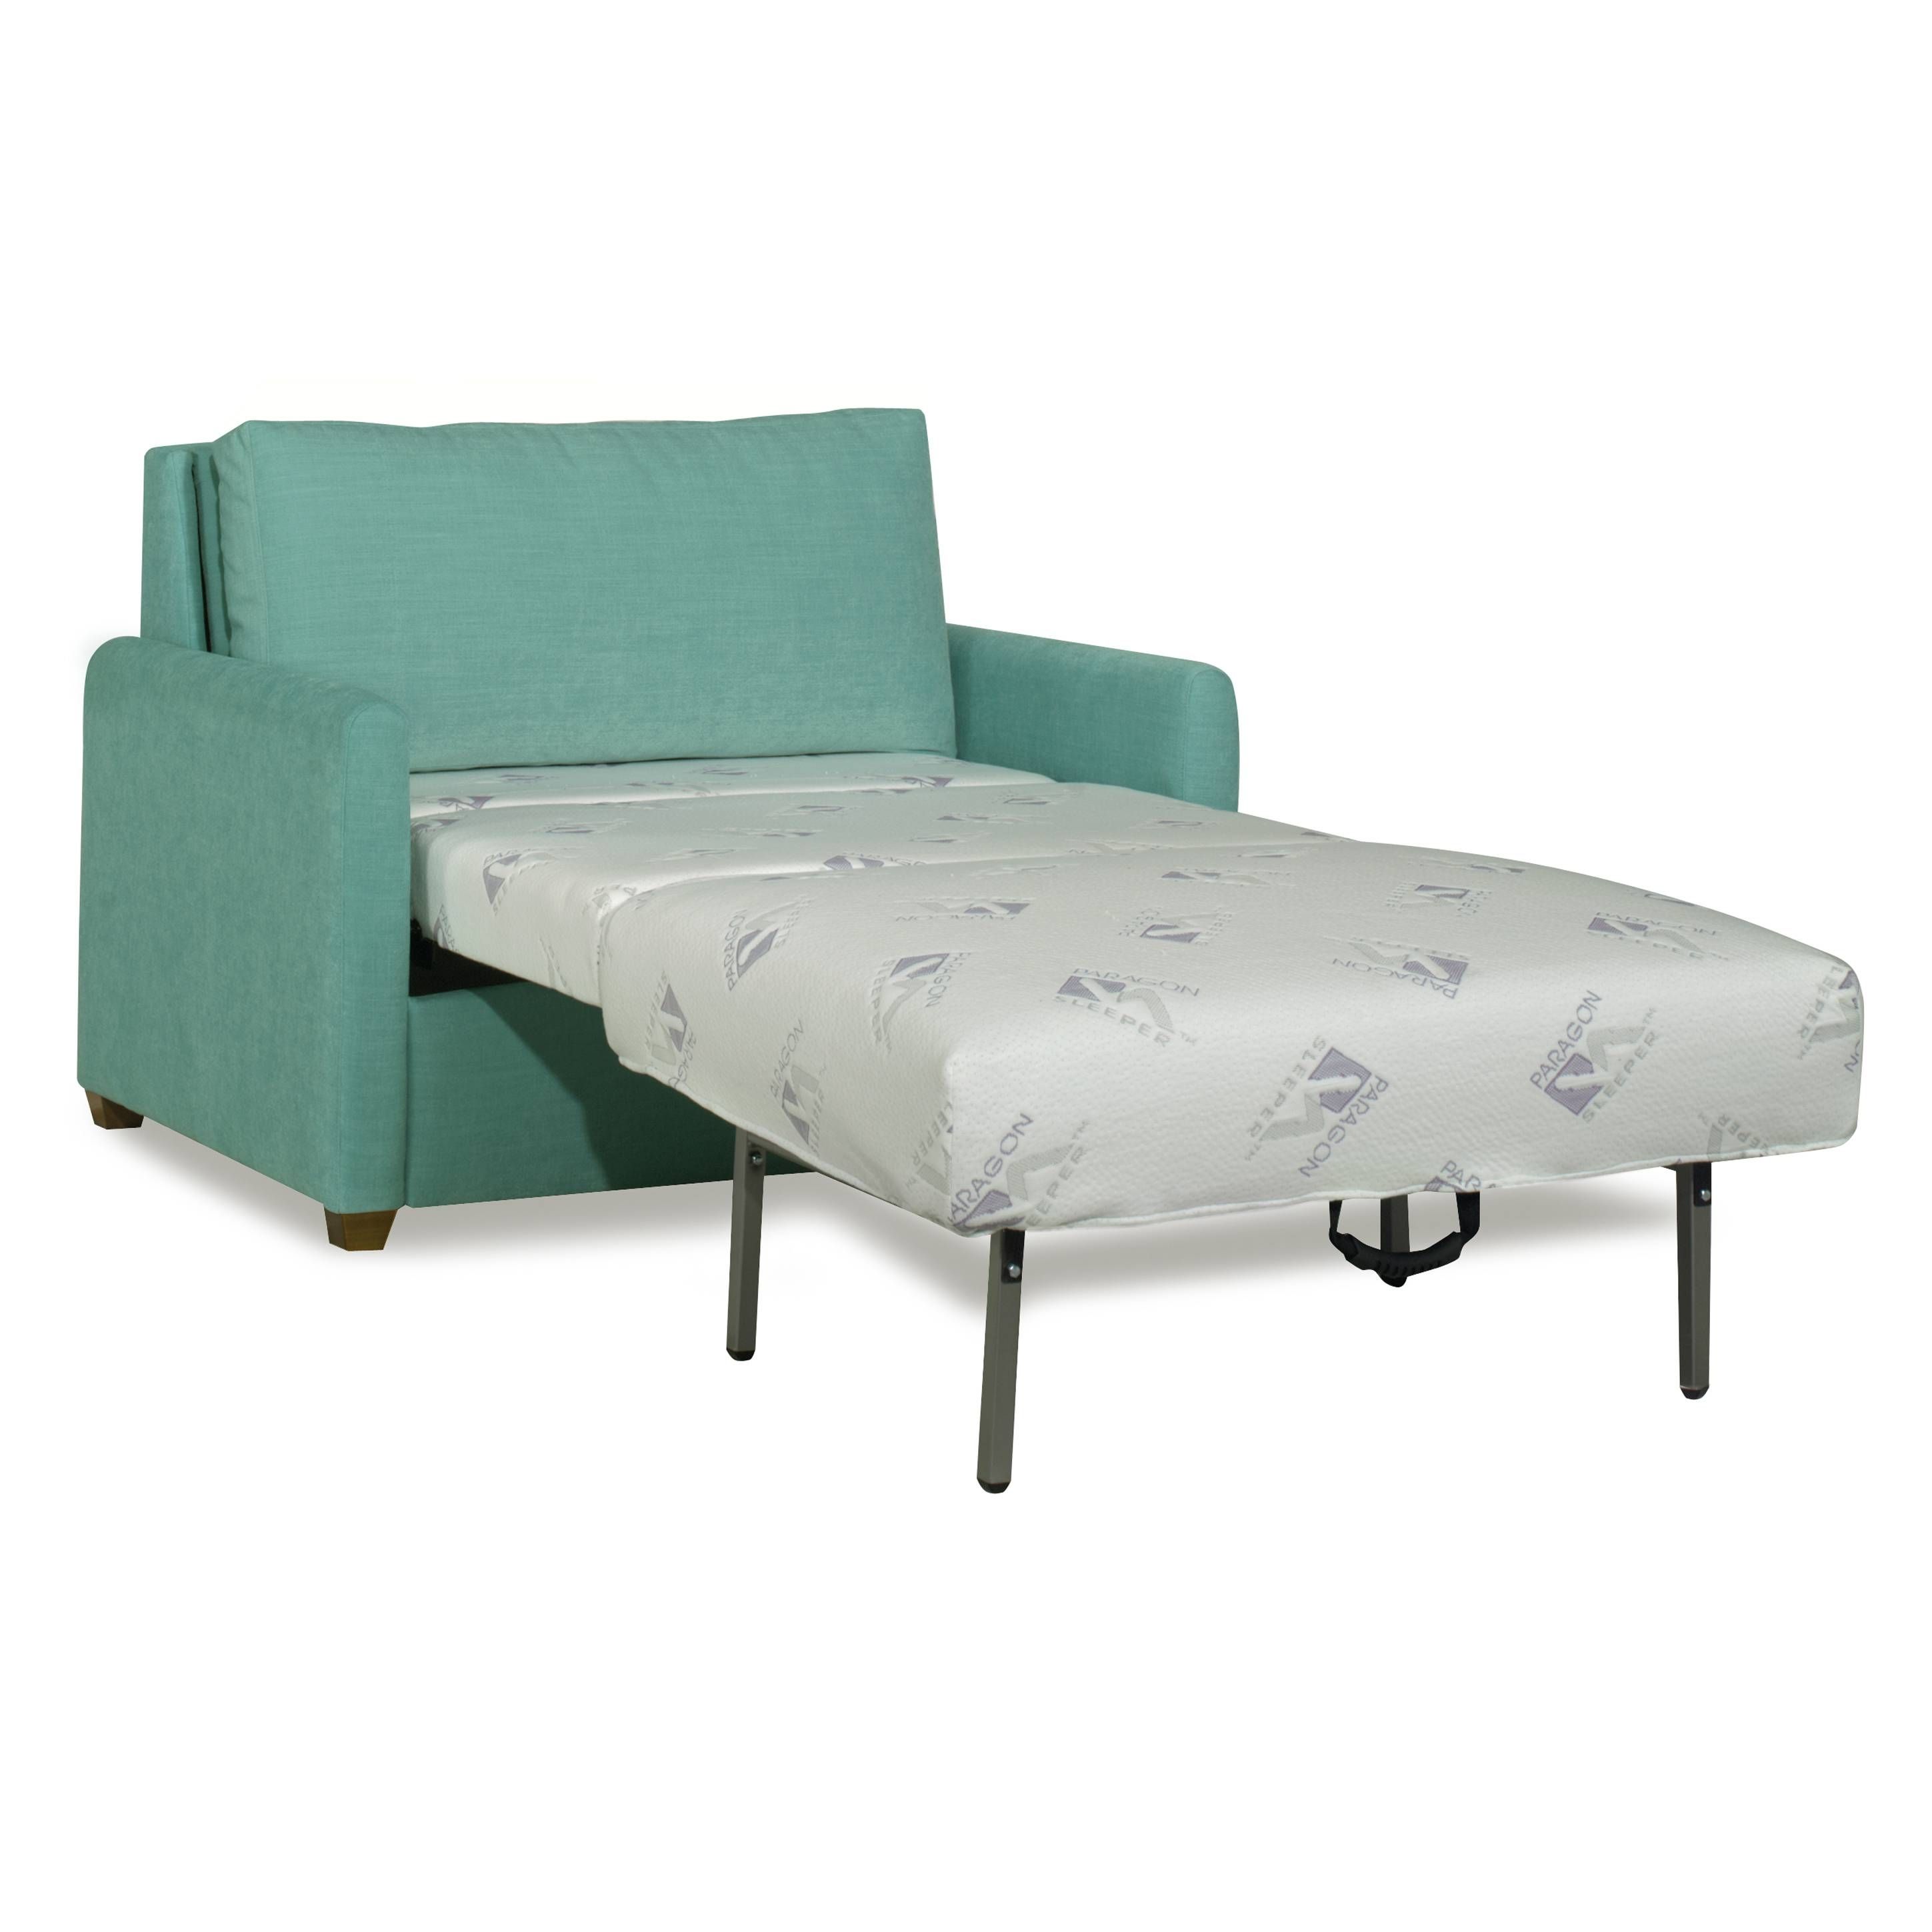 Sofas Center : Twin Sofa Sleeper Chairstwin Chairs Salechair Size With Regard To Twin Sofa Chairs (Photo 5 of 30)